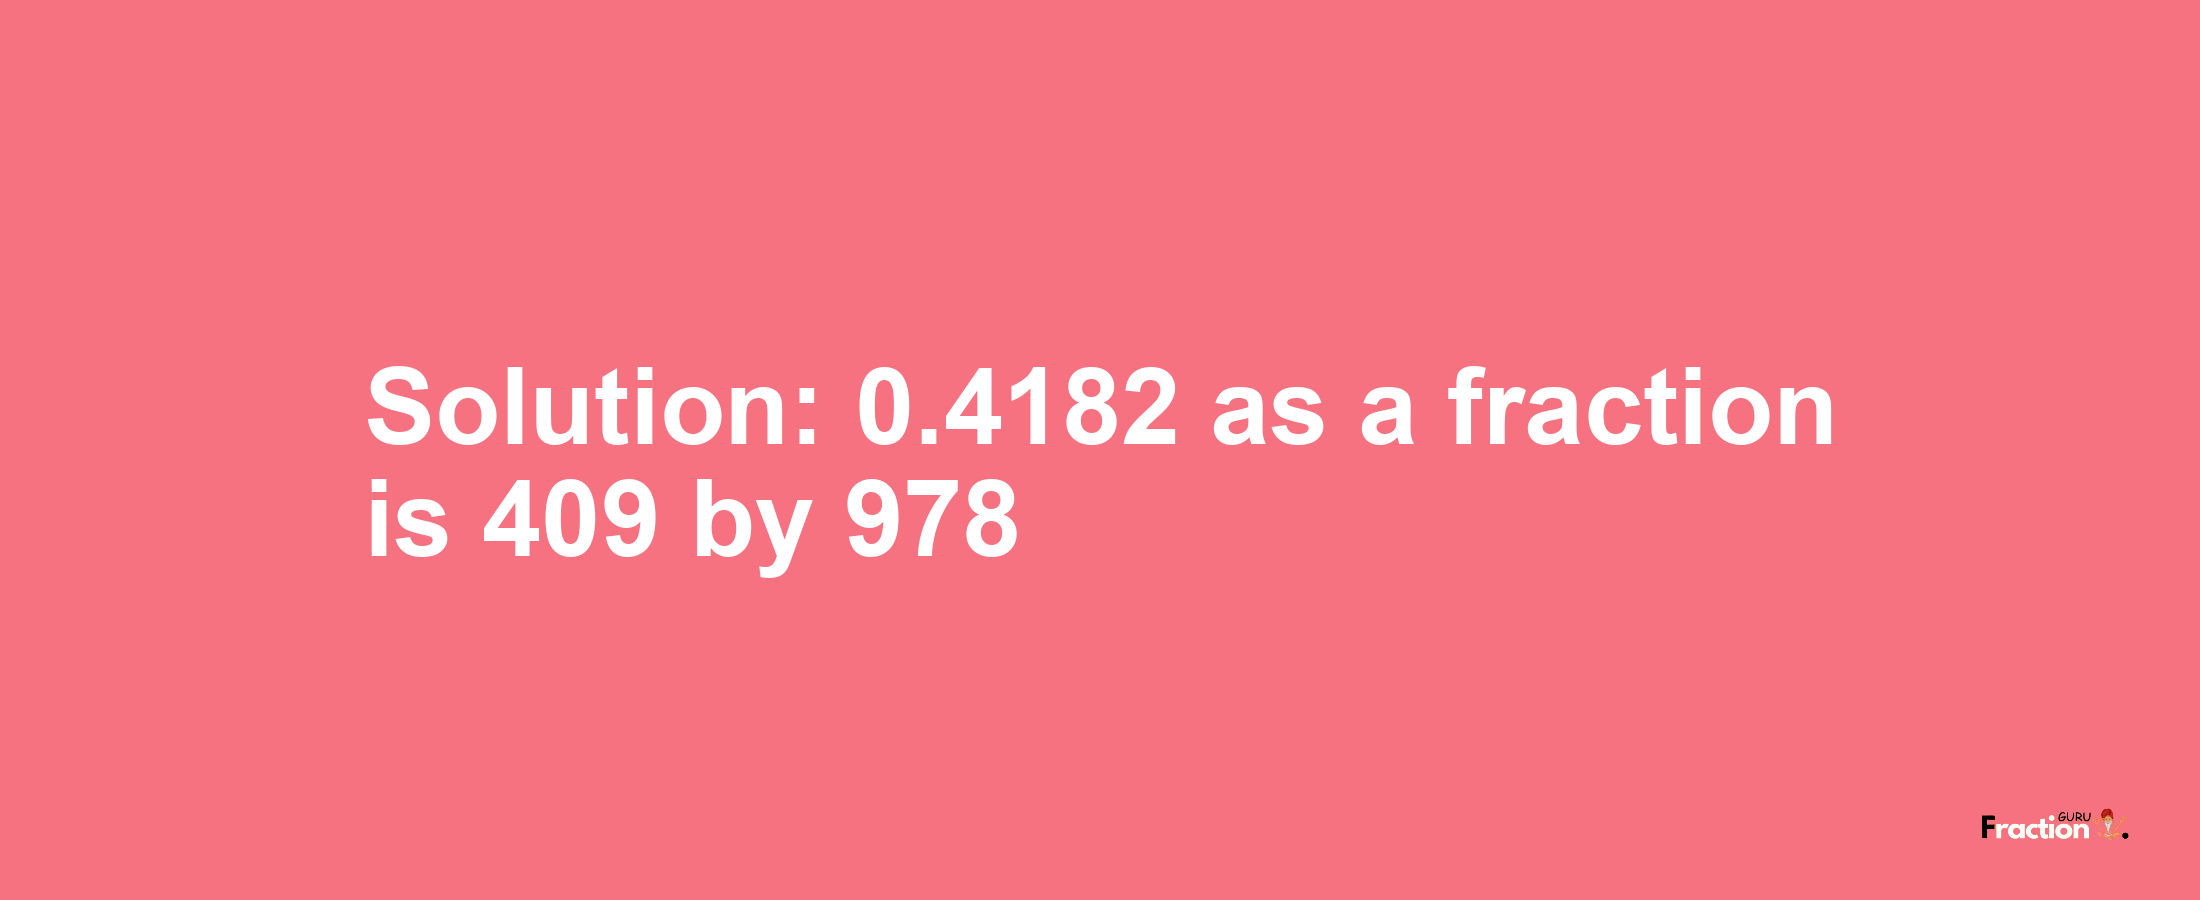 Solution:0.4182 as a fraction is 409/978